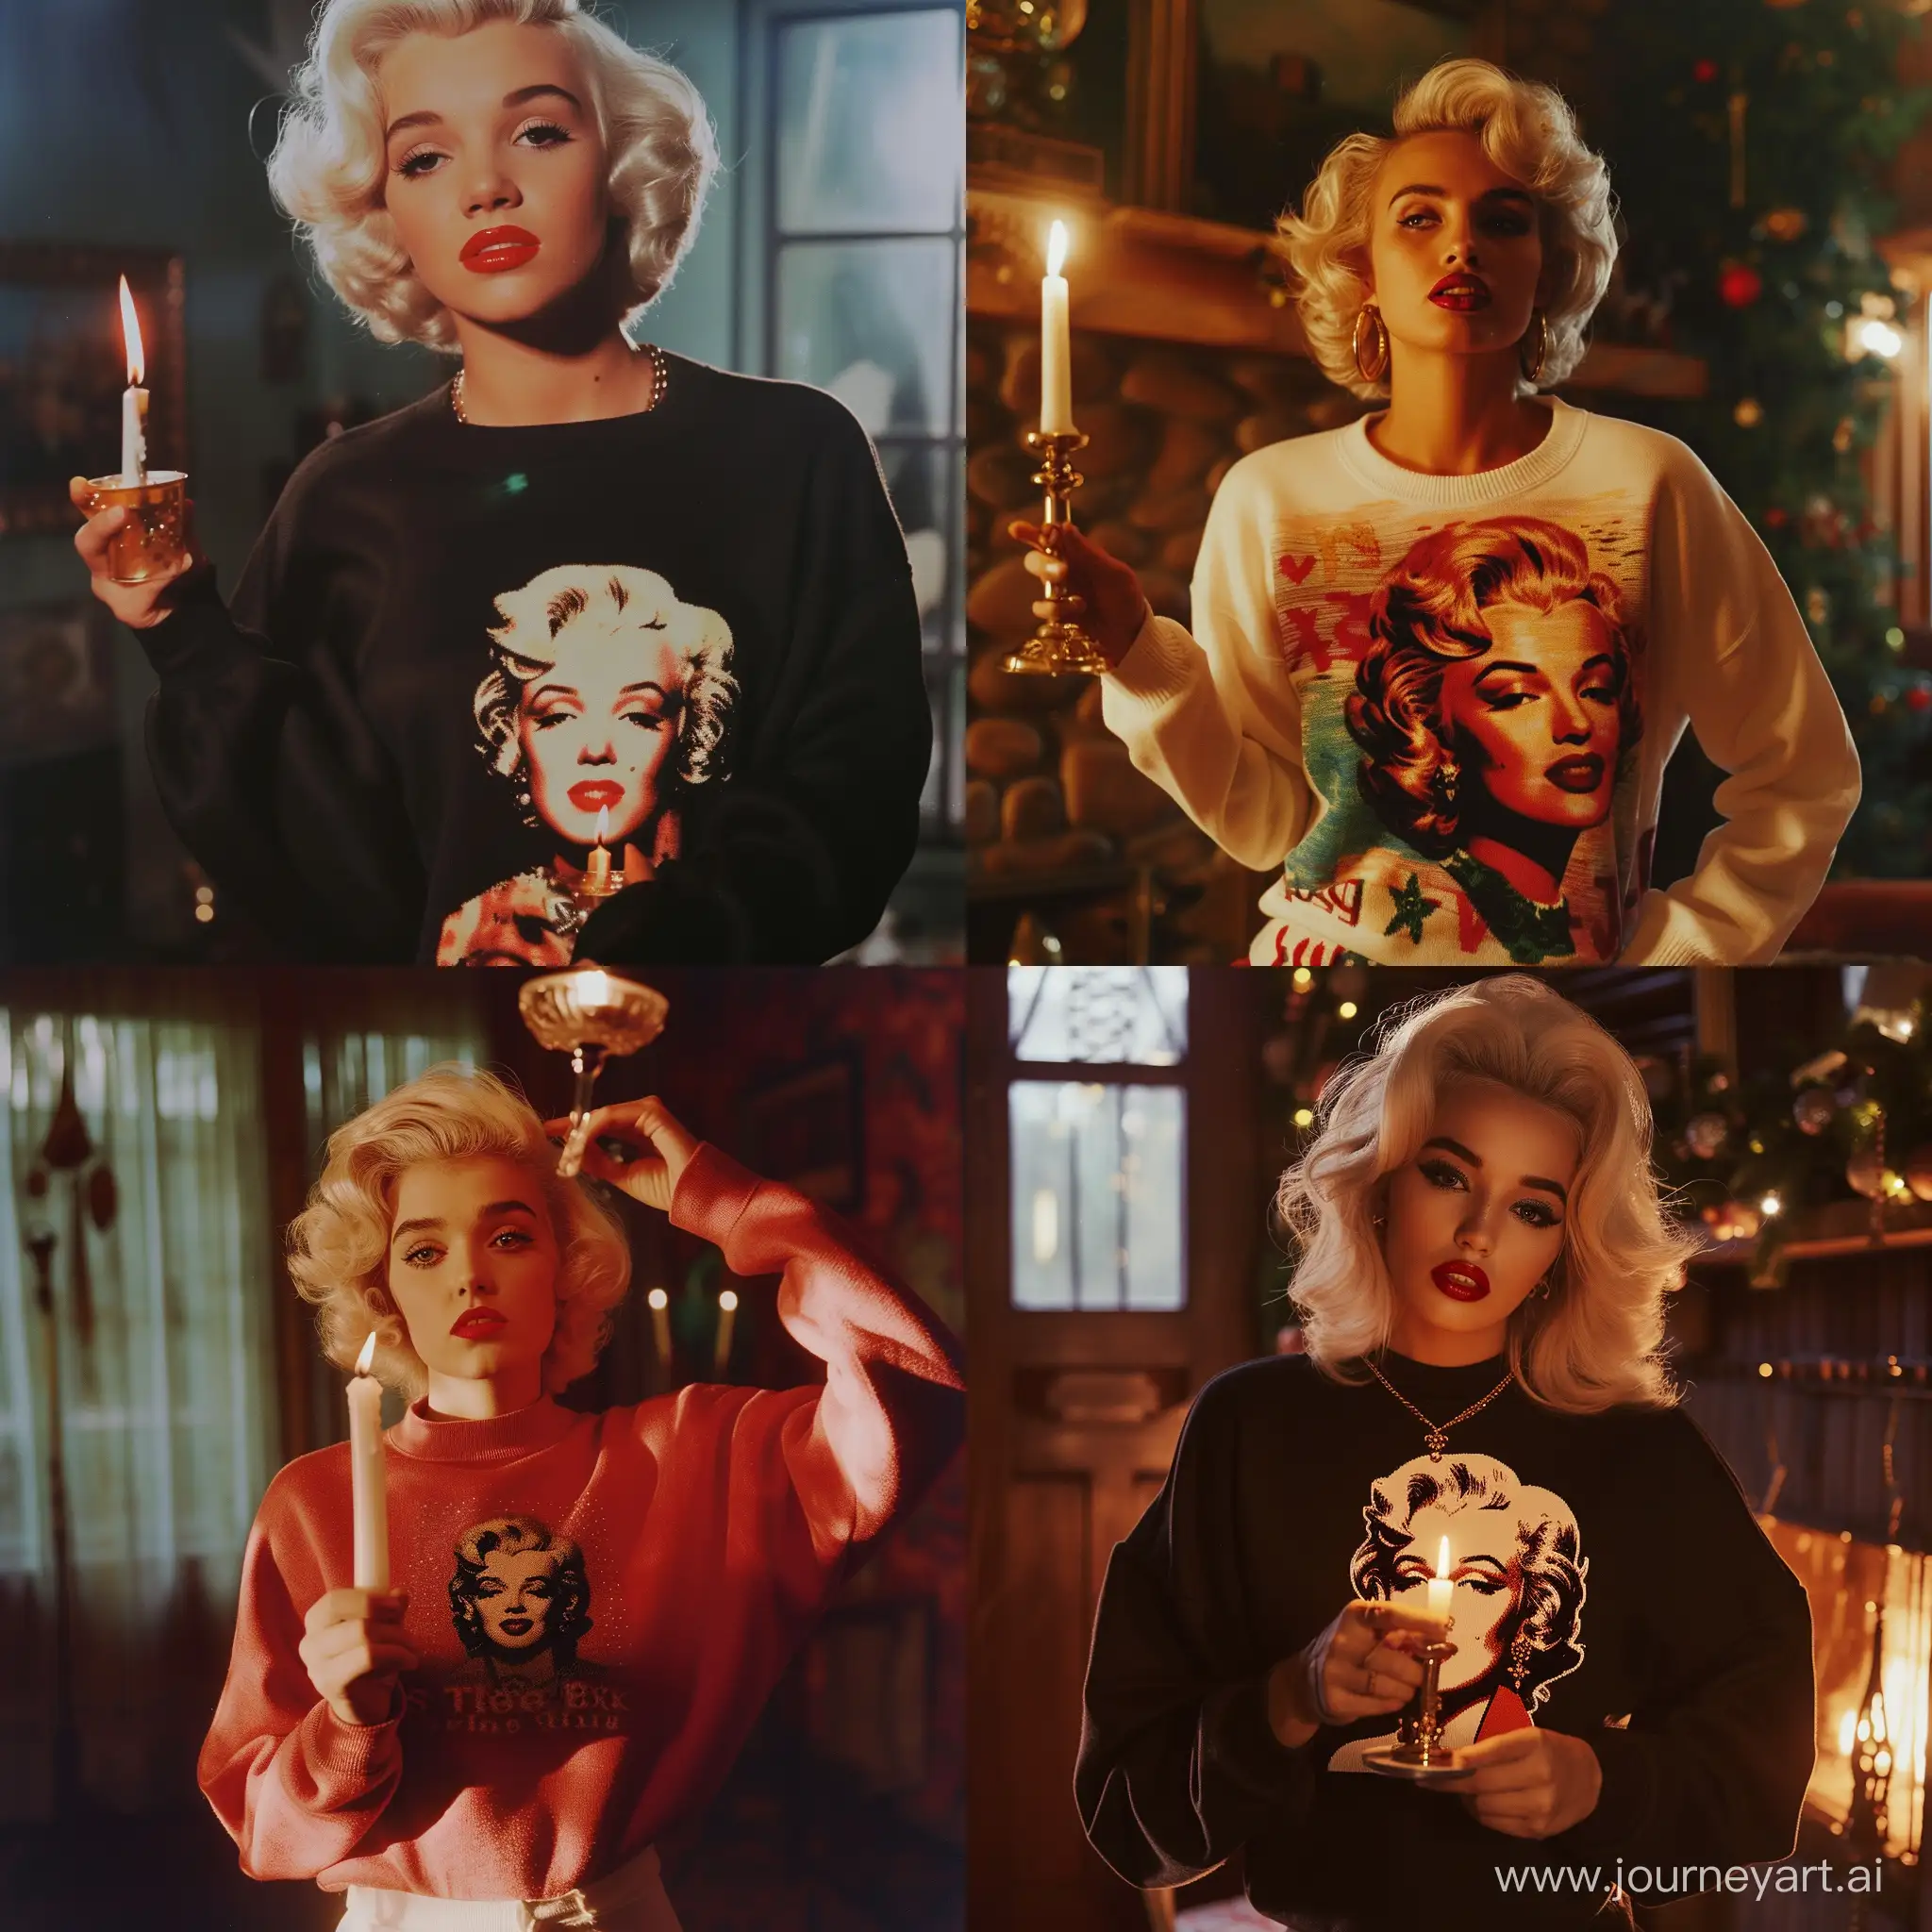 Marilyn Monroe sweater is holding a candle in her hand and looking at the camera